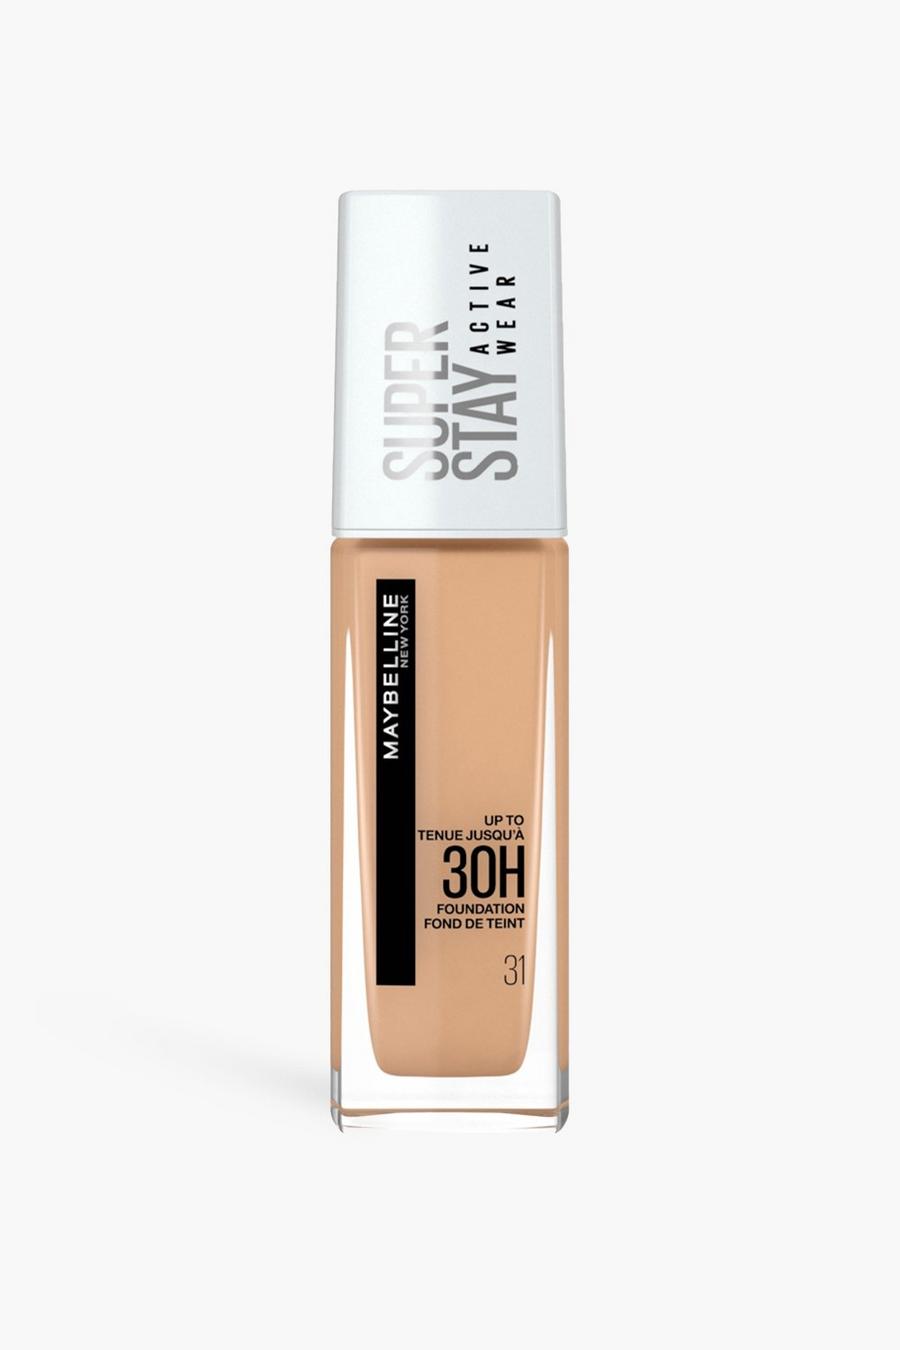 Maybelline Superstay Foundation, 31 warm nude